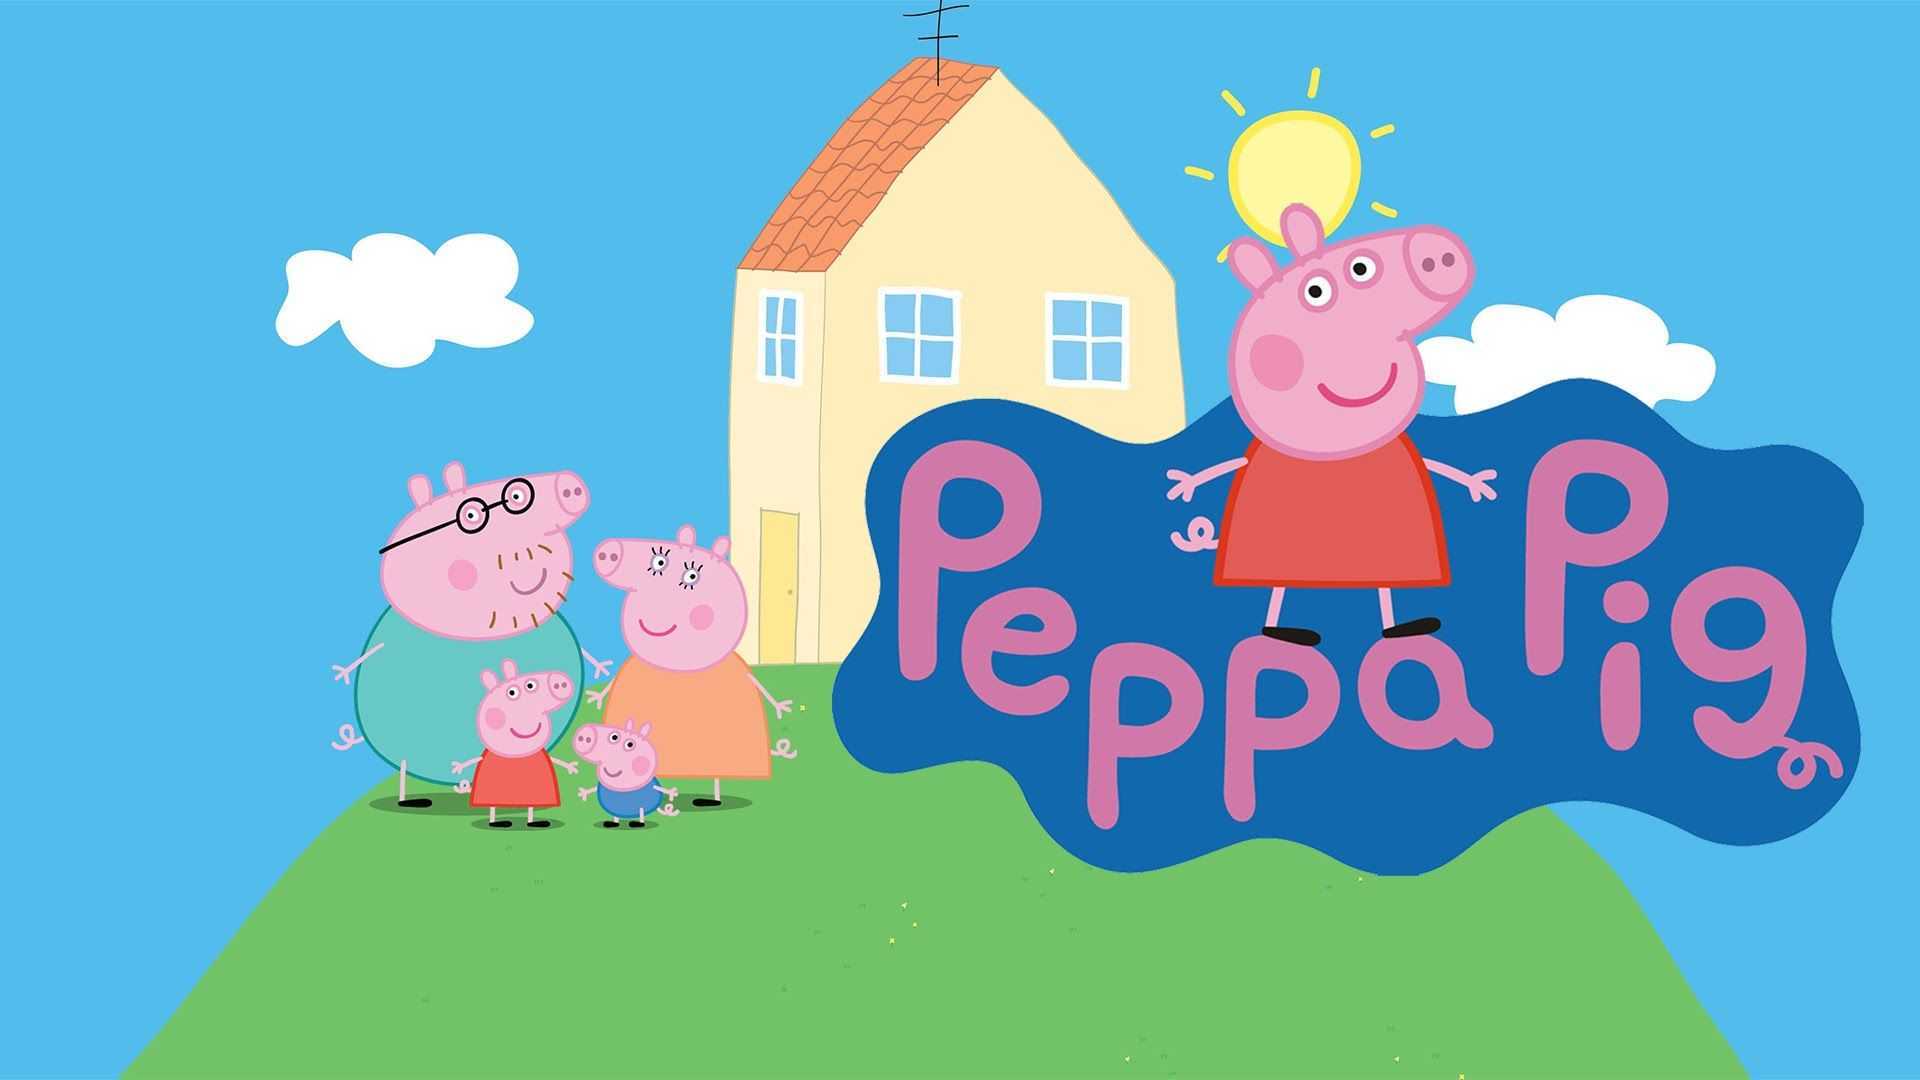 Peppa pig house scary wallpaper